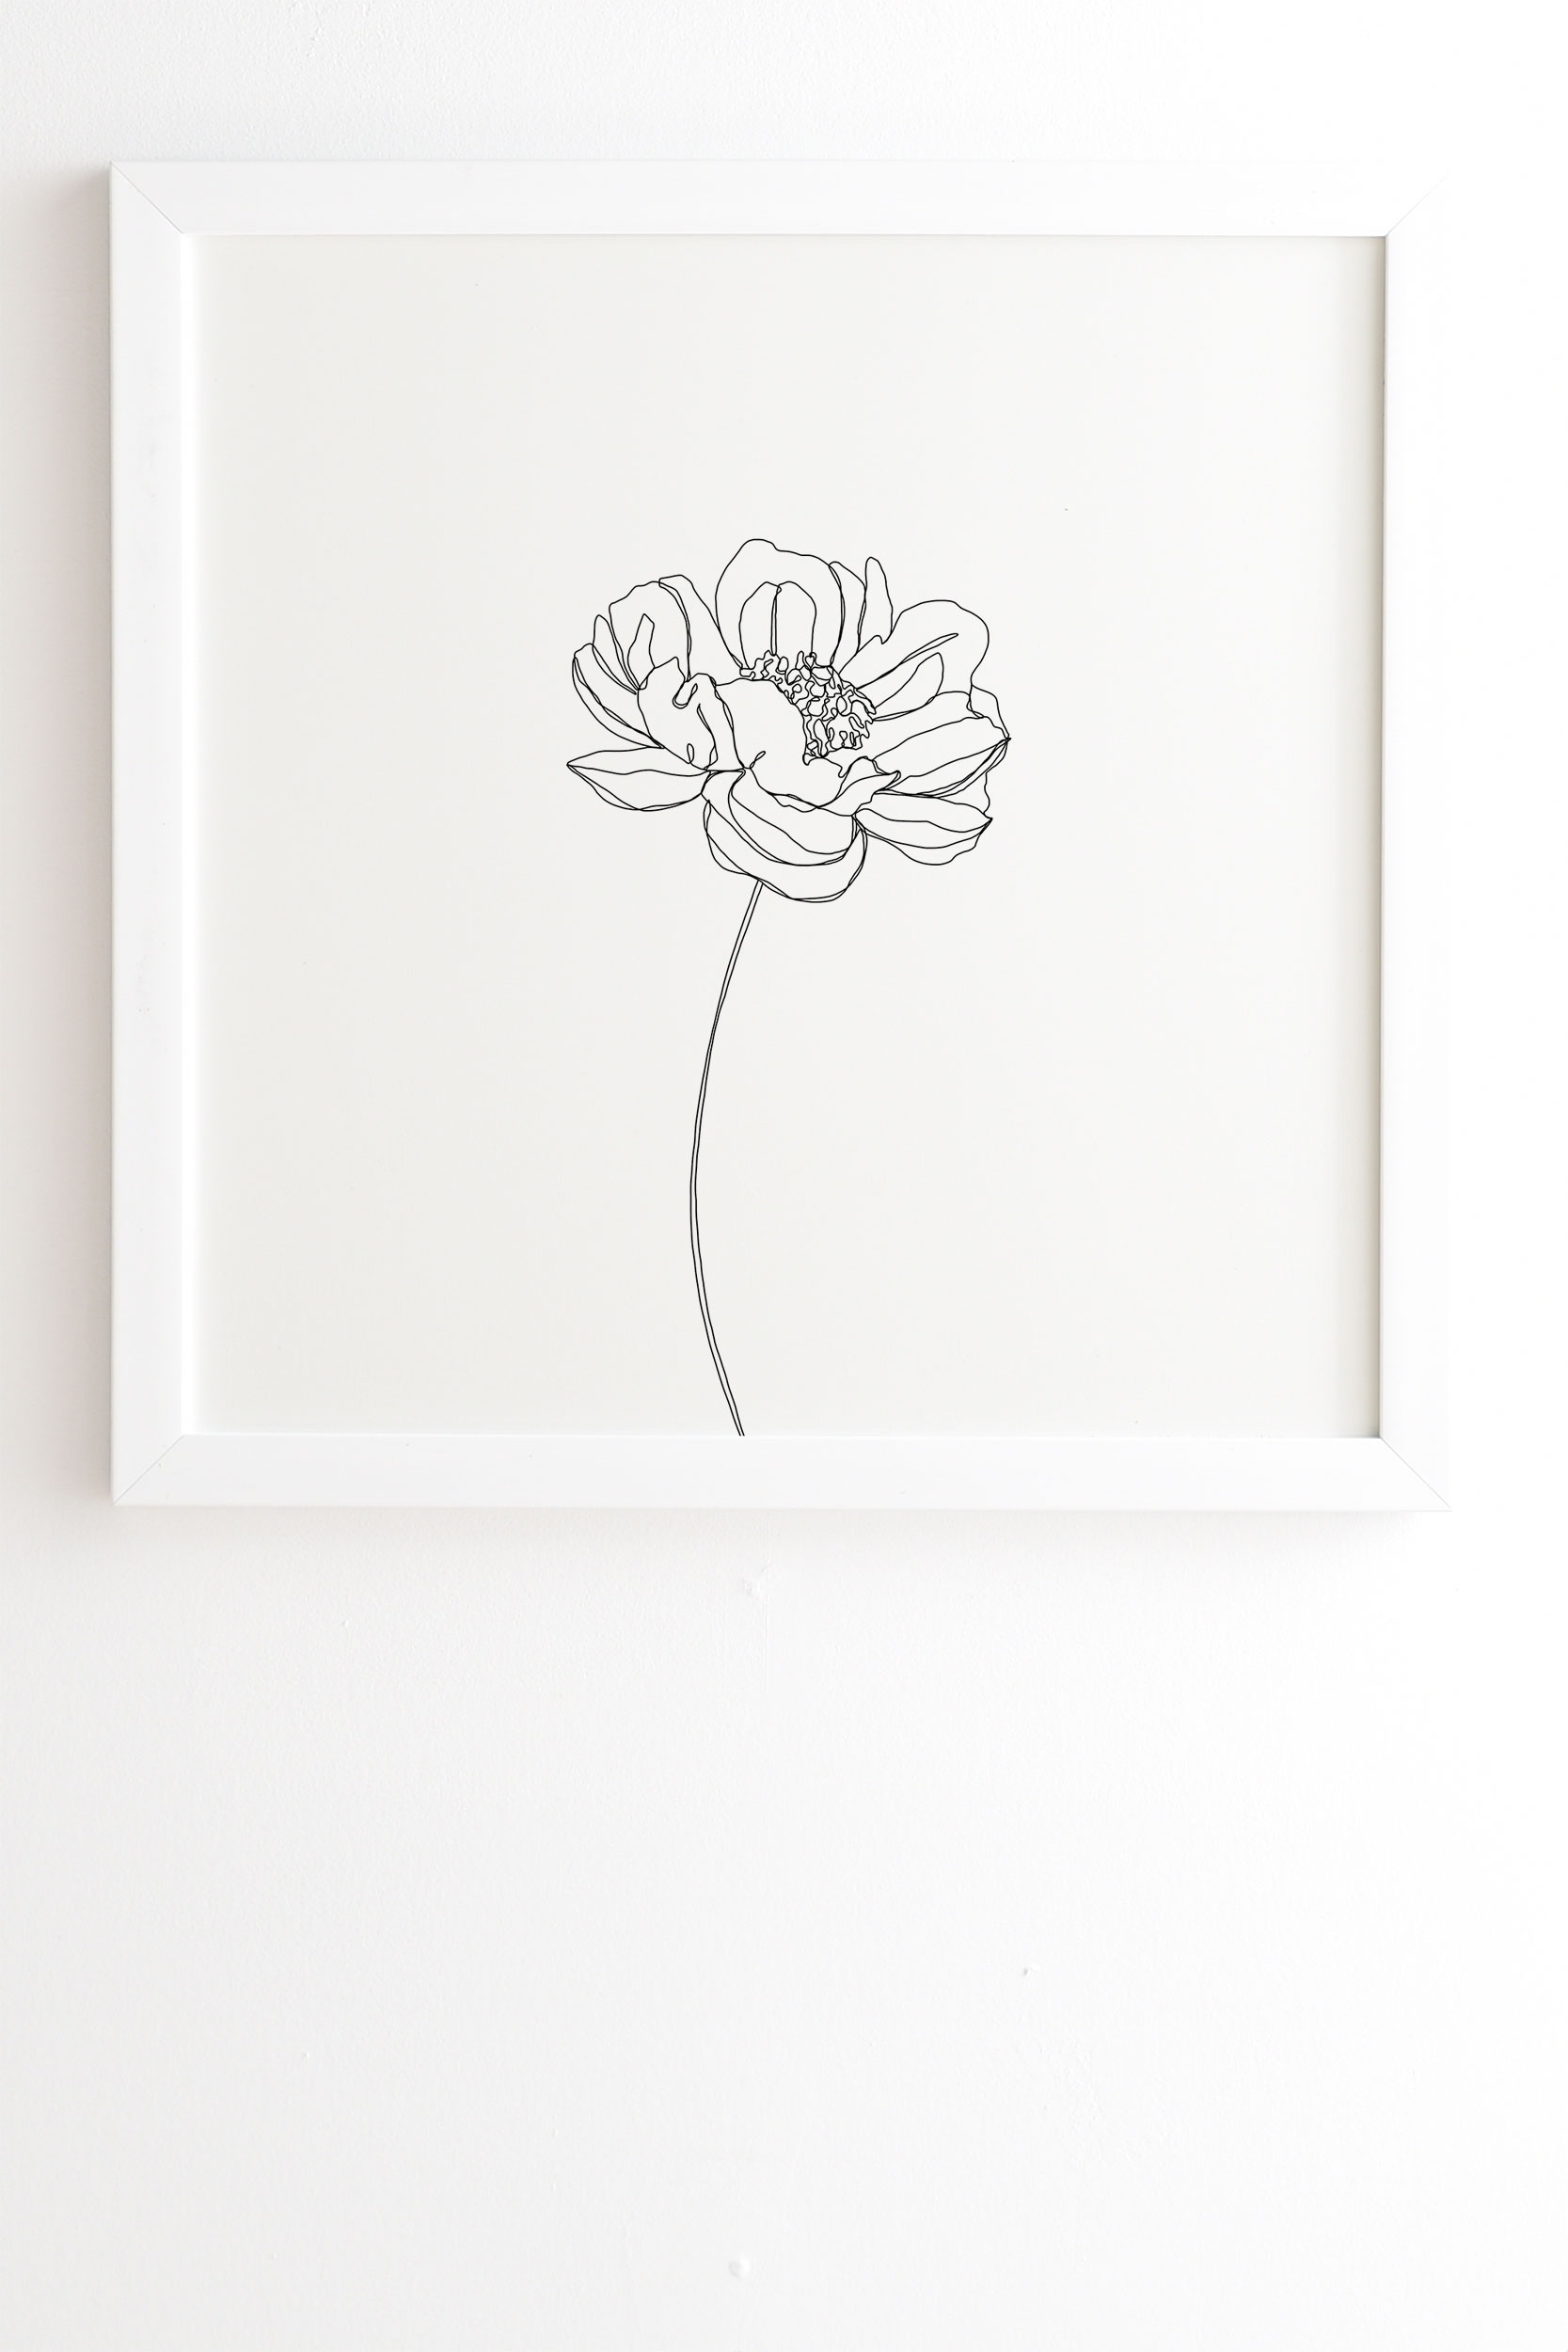 Single Flower Drawing Hazel by The Colour Study - Framed Wall Art Basic White 19" x 22.4" - Image 1